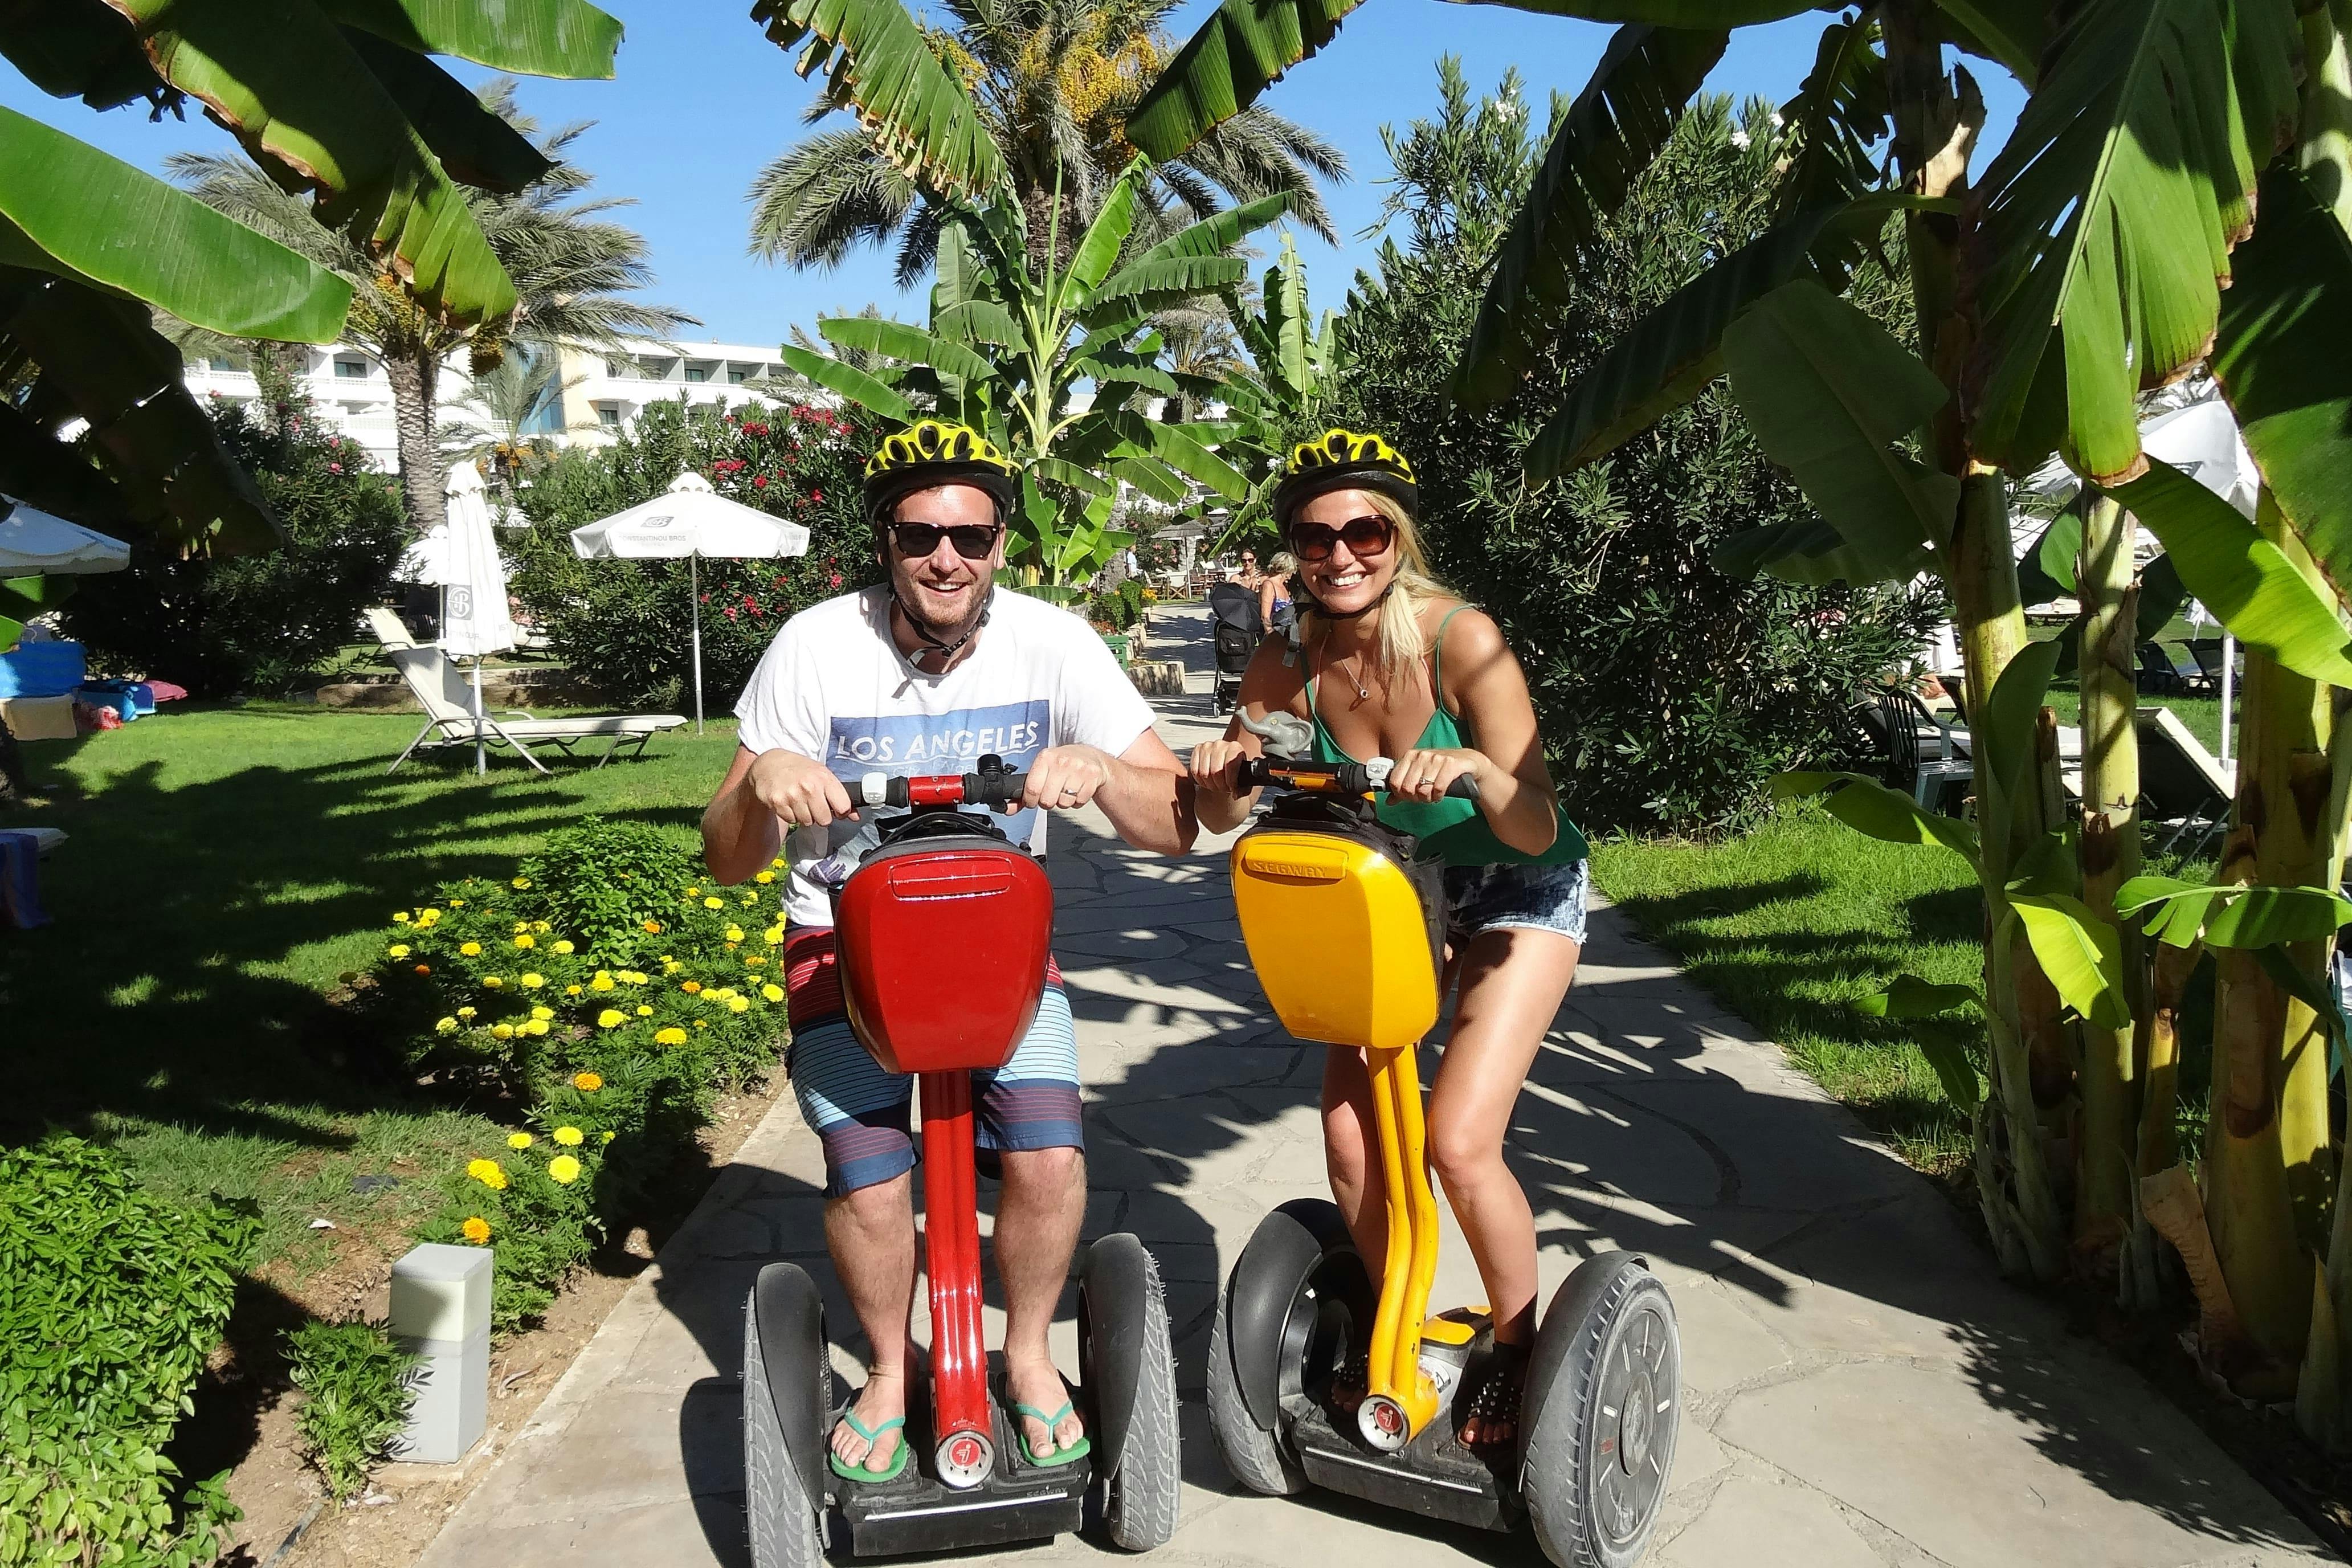 Paphos Electric Scooter Small Group Tour Ticket